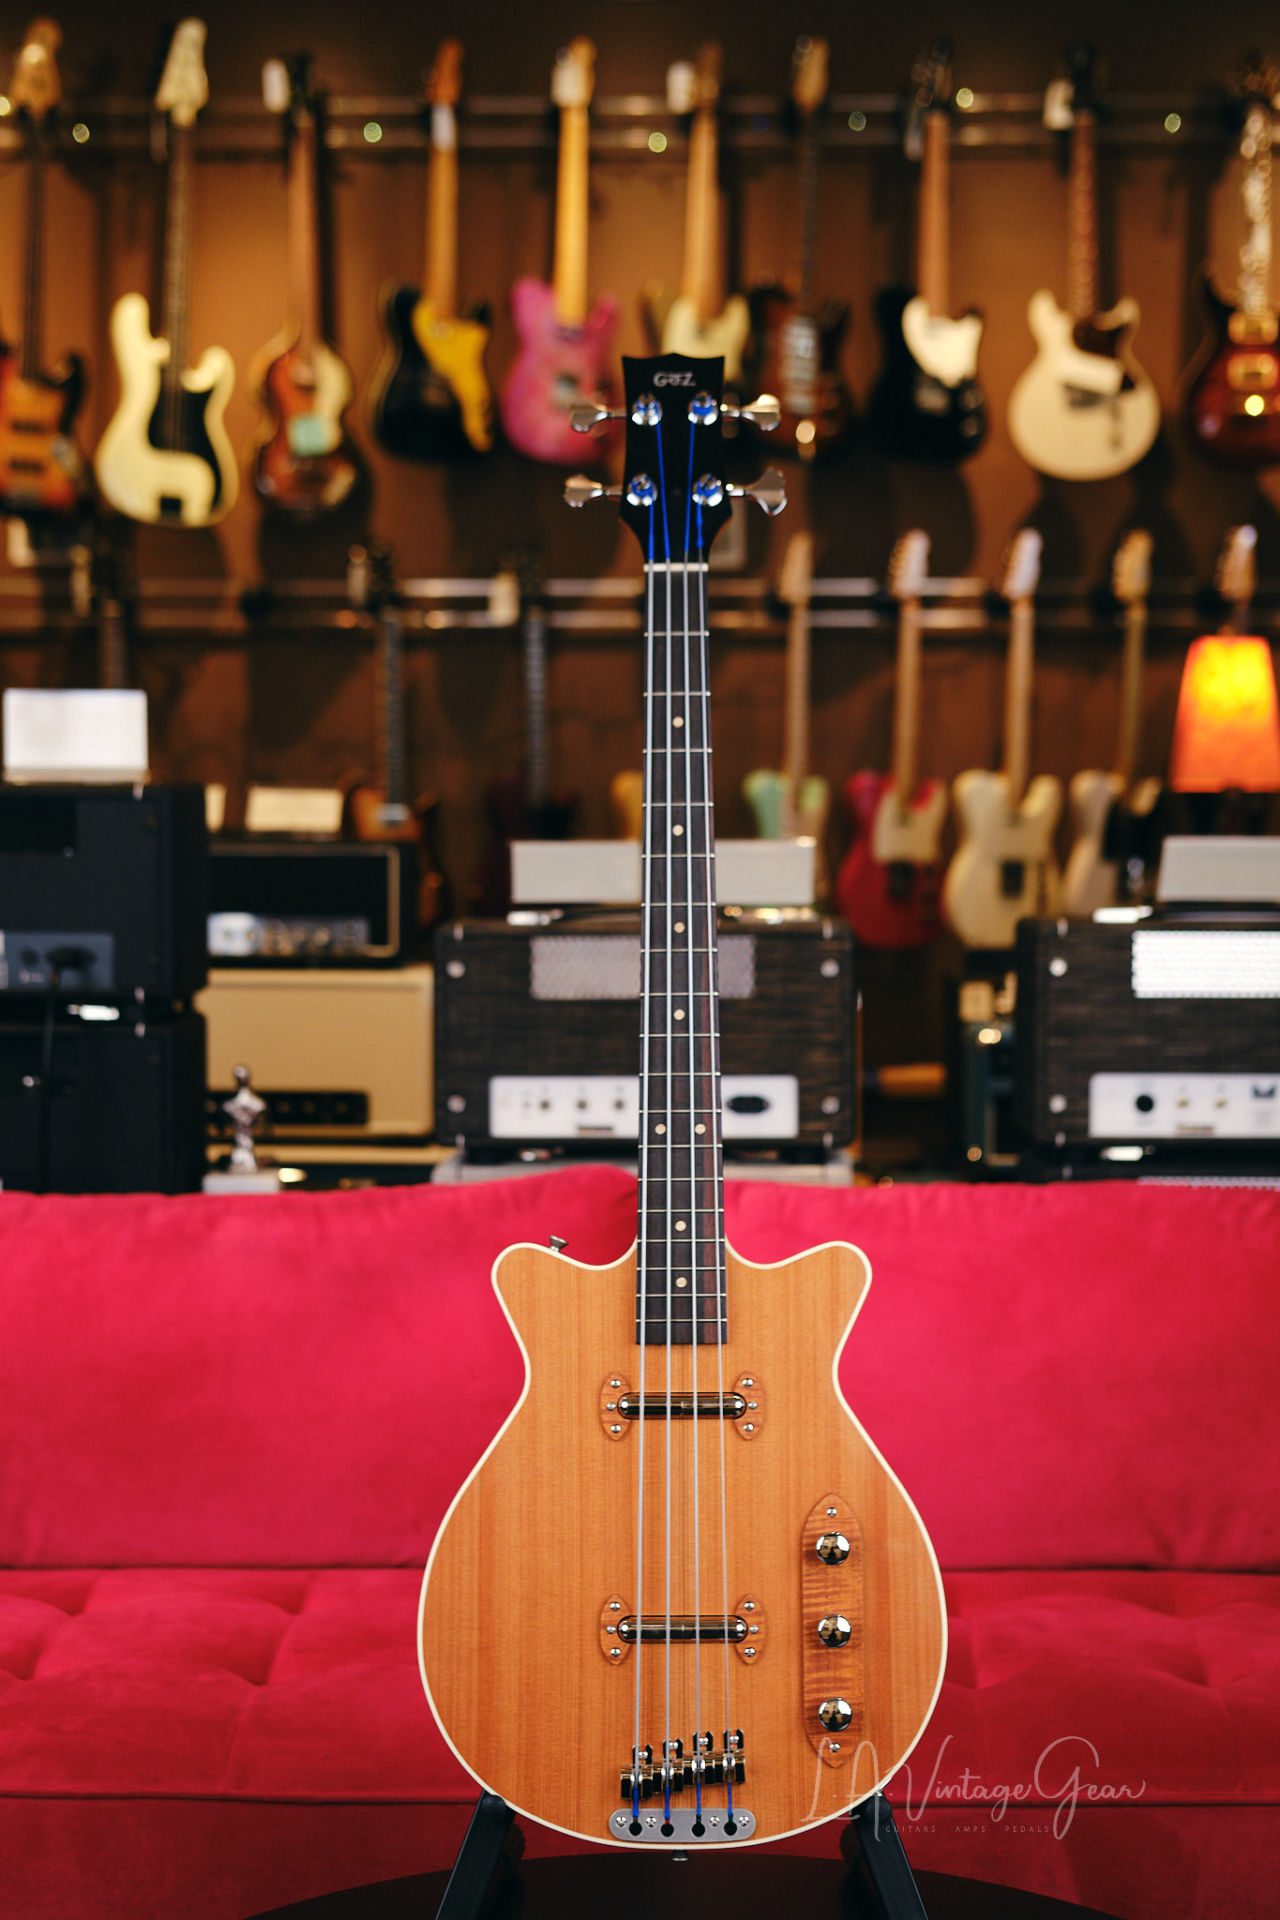 Grez 'Mendocino' Short Scale Electric Bass Guitar - Compact Lightweight  Semi-Hollowbody! Solid Old Growth Redwood Top!